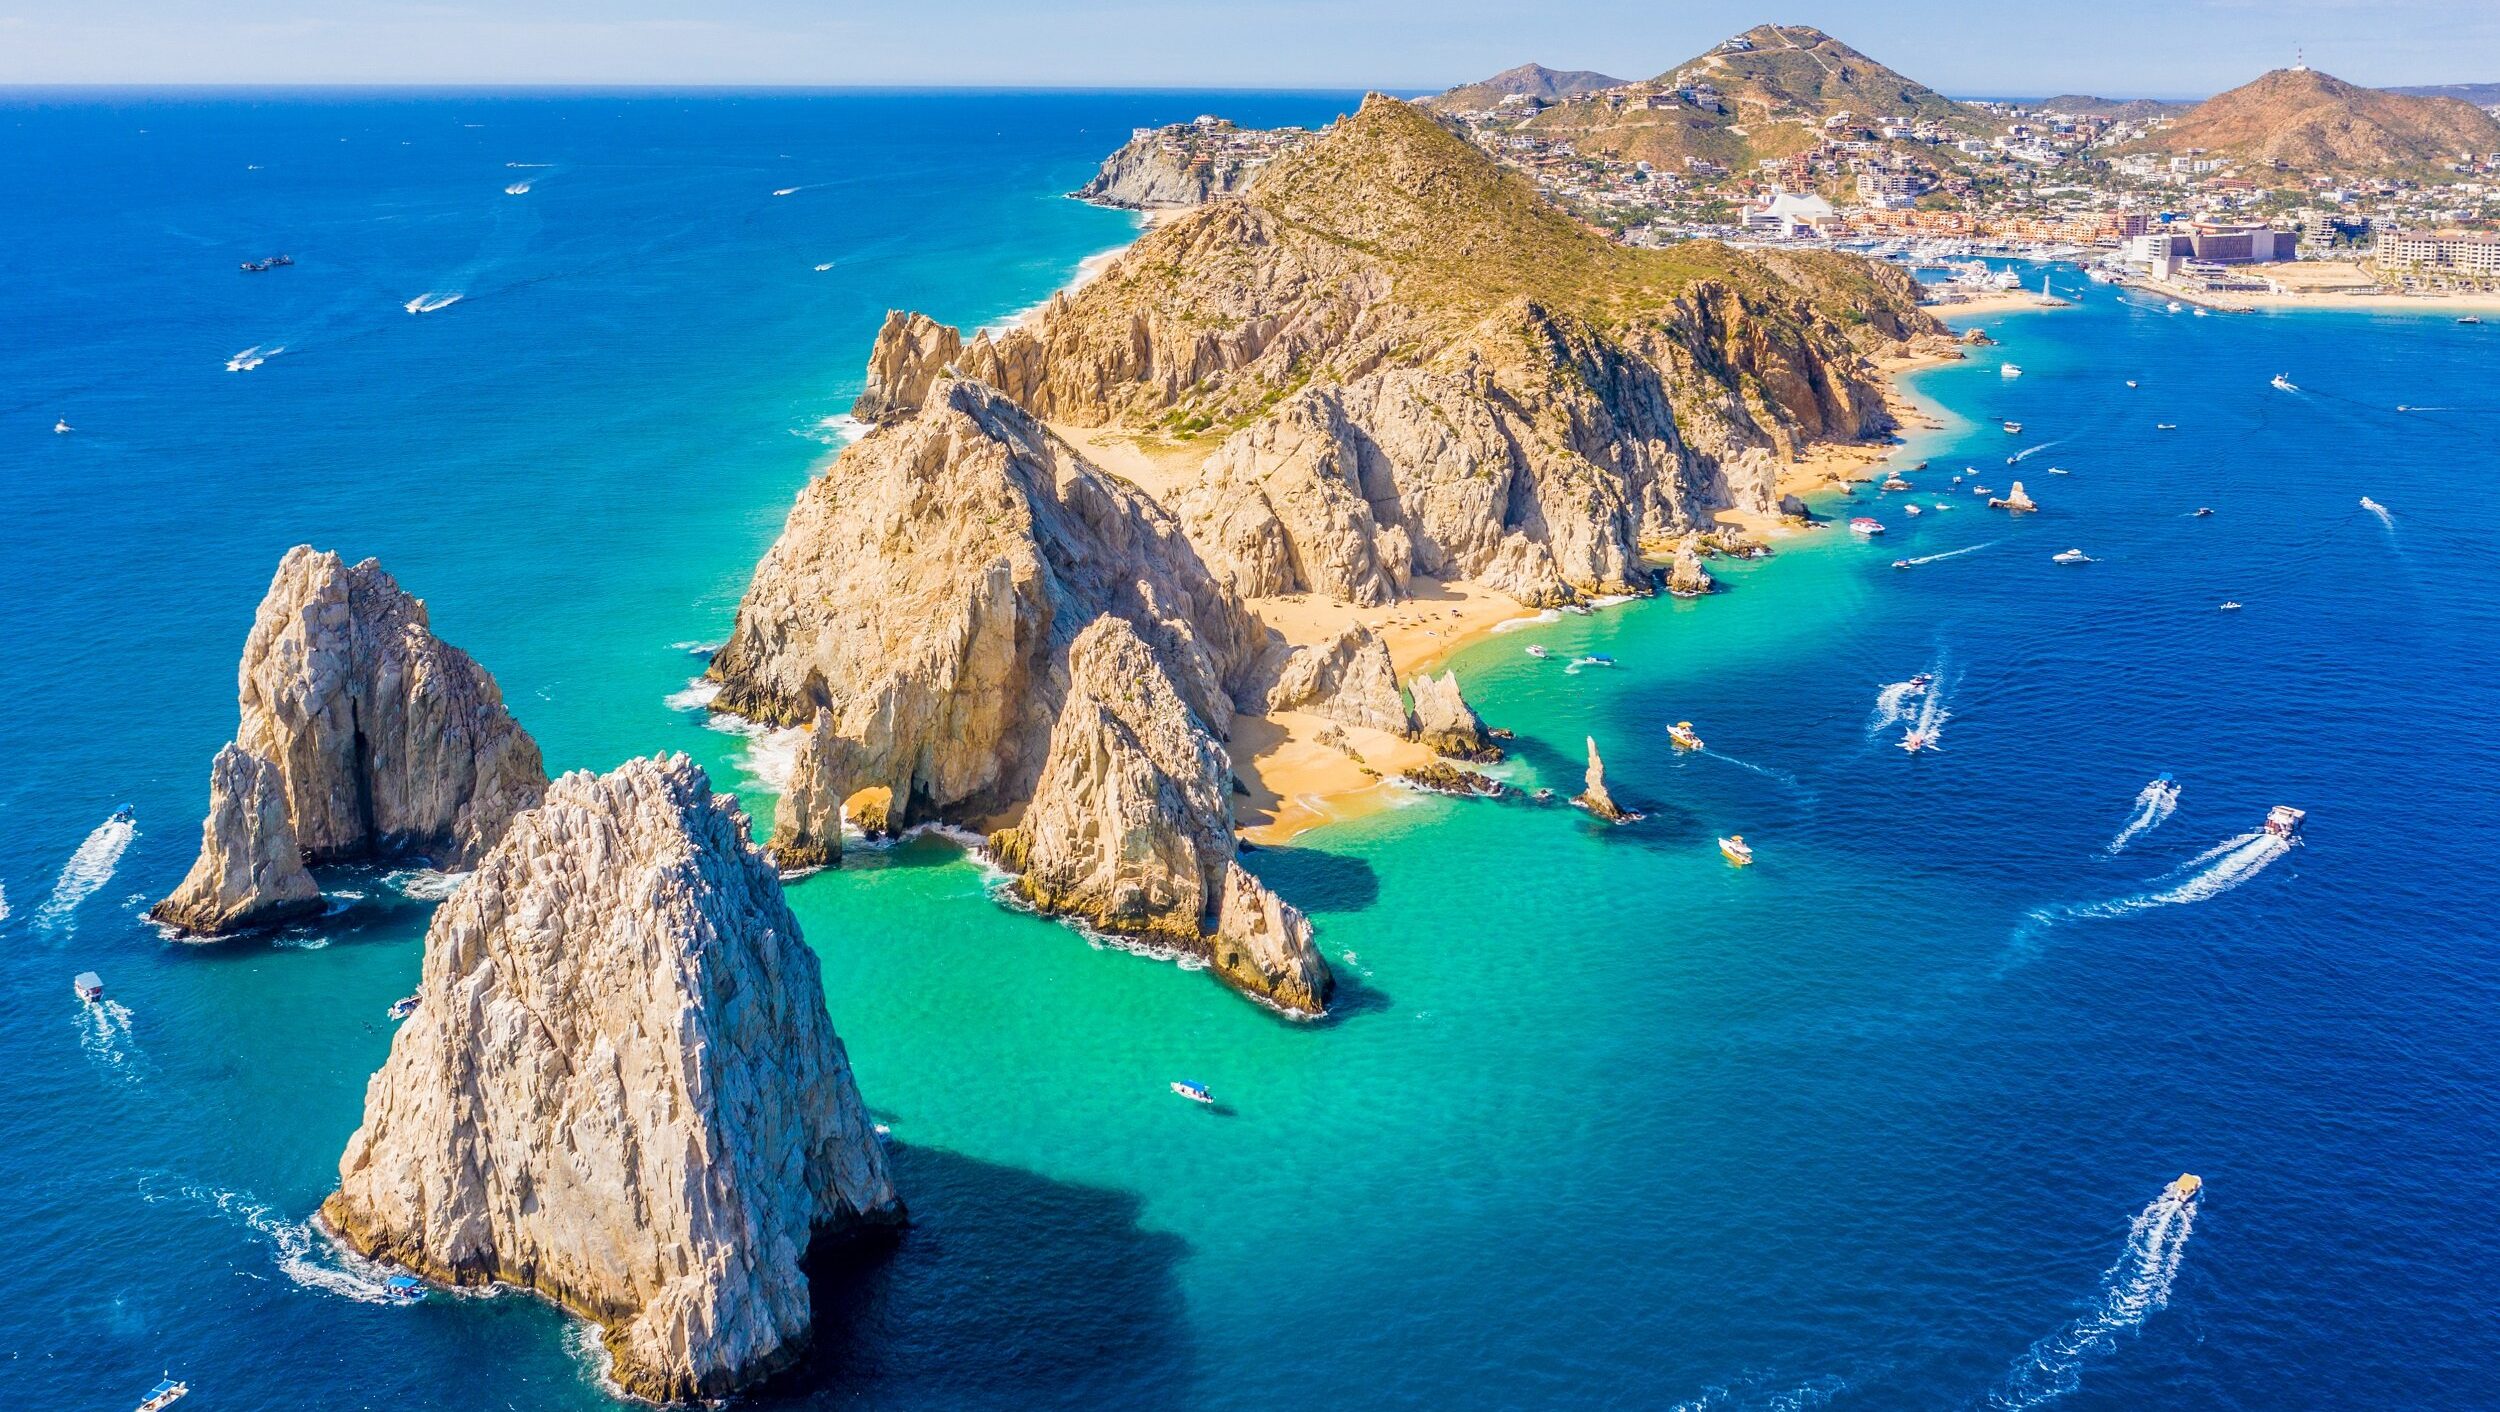 Direct flights from Edmonton to San Jose del Cabo for only 250 CAD round-trip including GST!